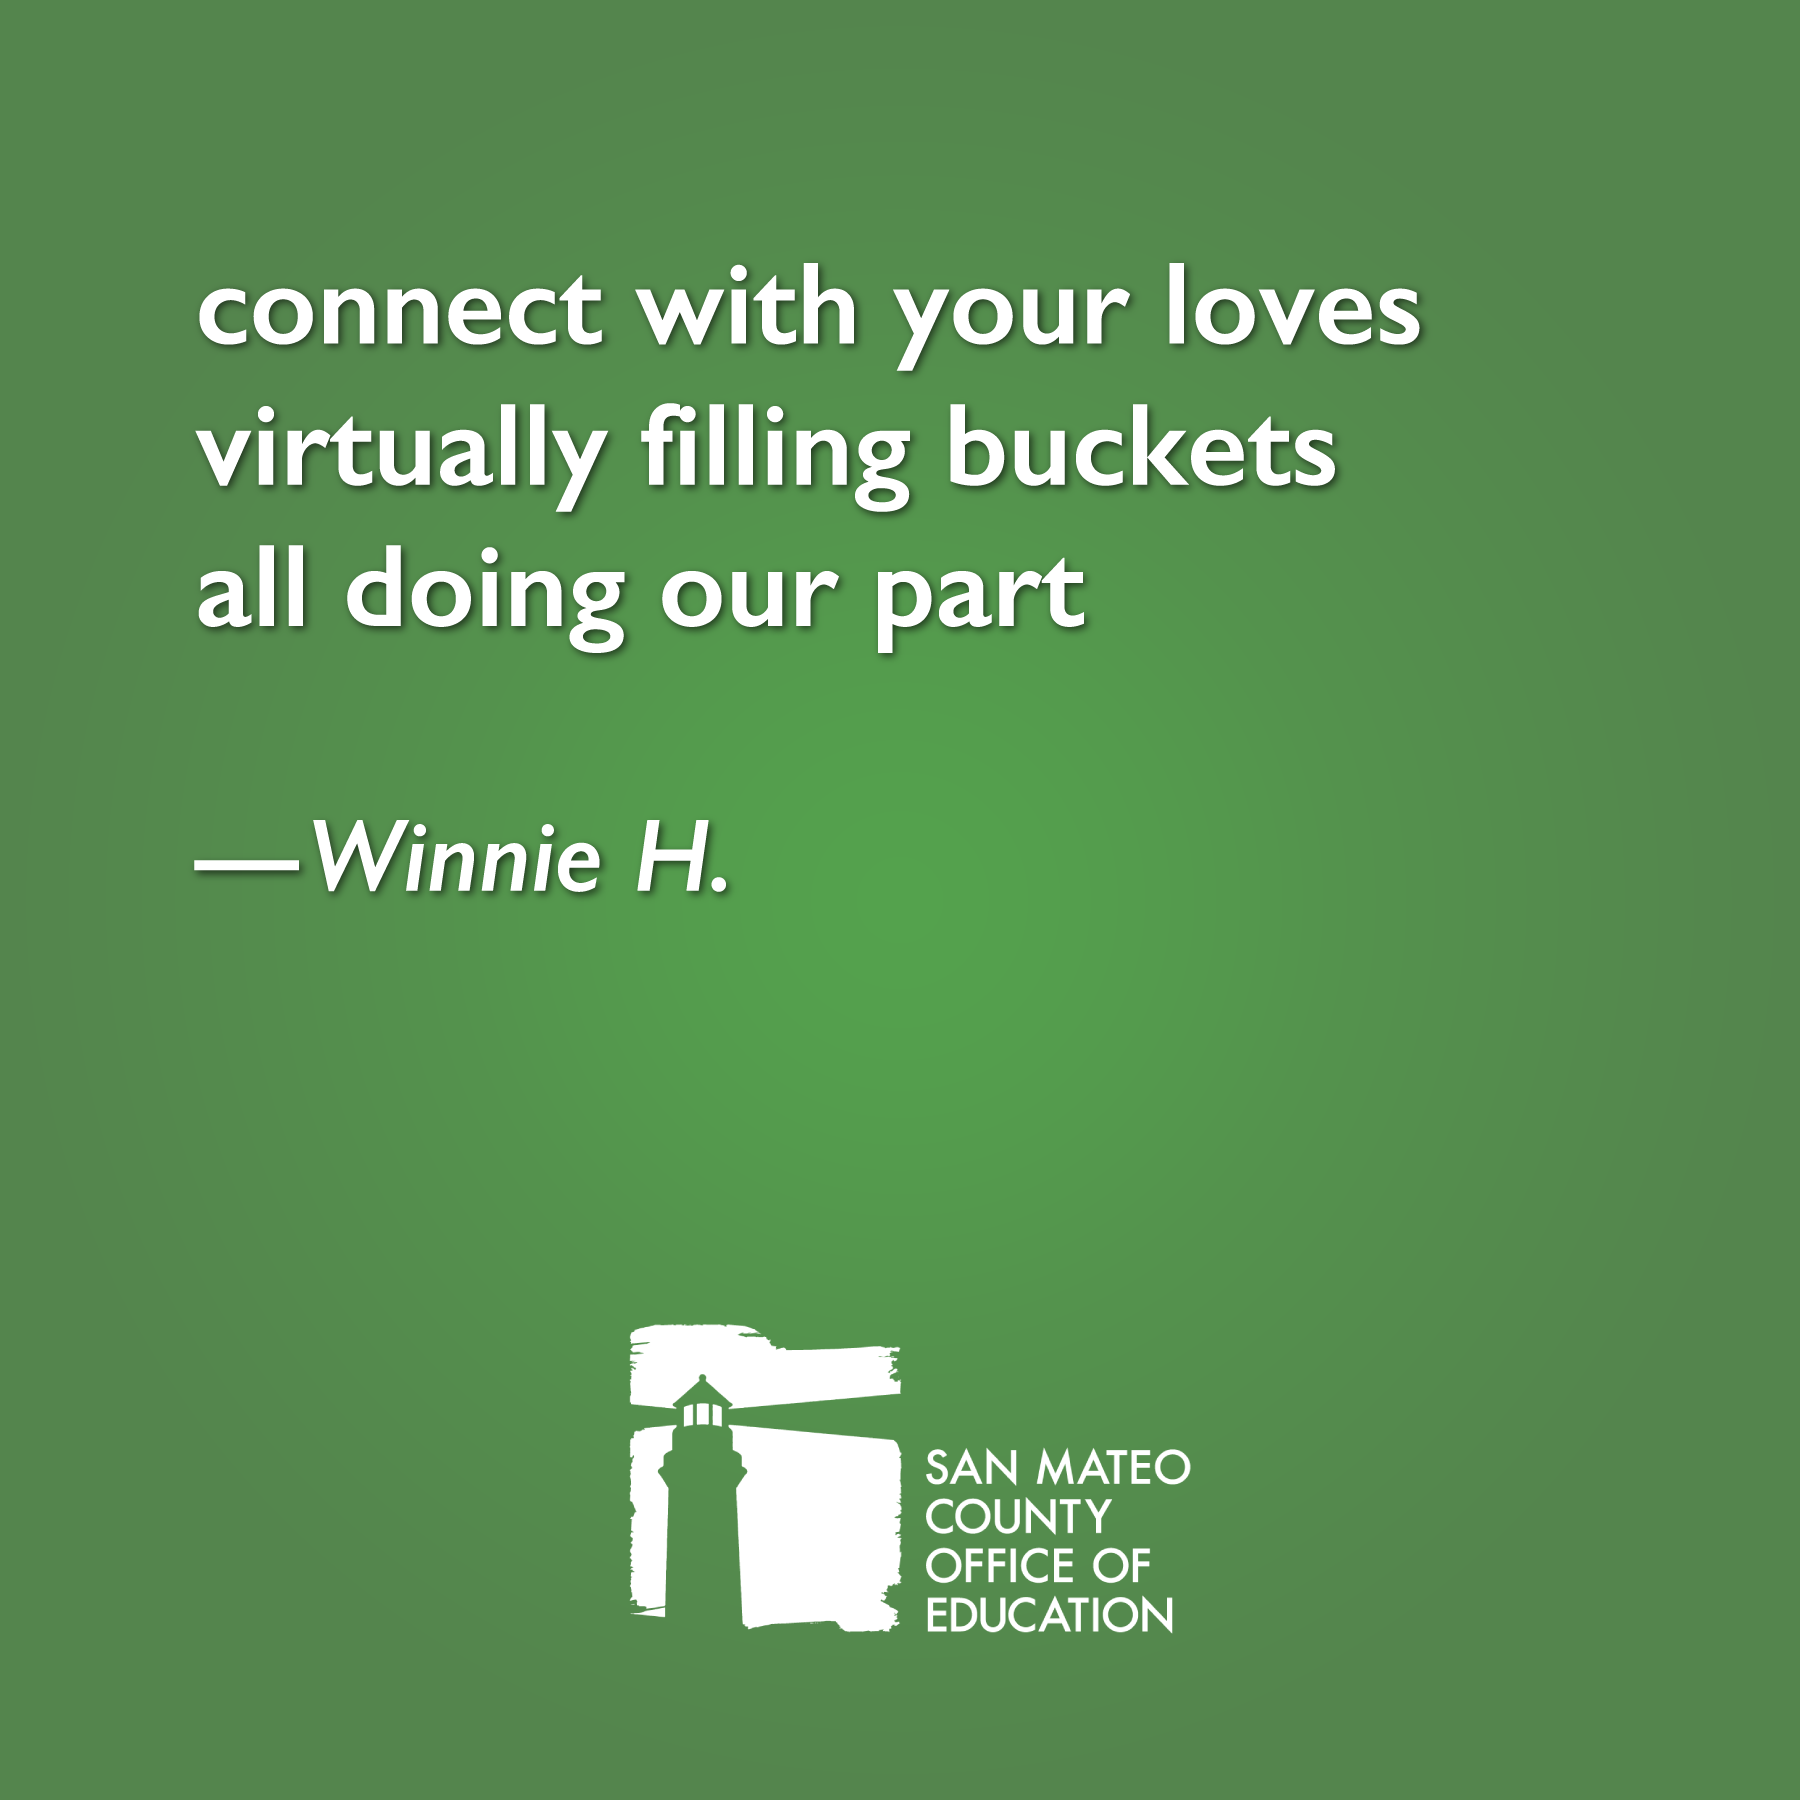 Connect with your loves virtually filling buckets all doing our part. Written by Winnie H.